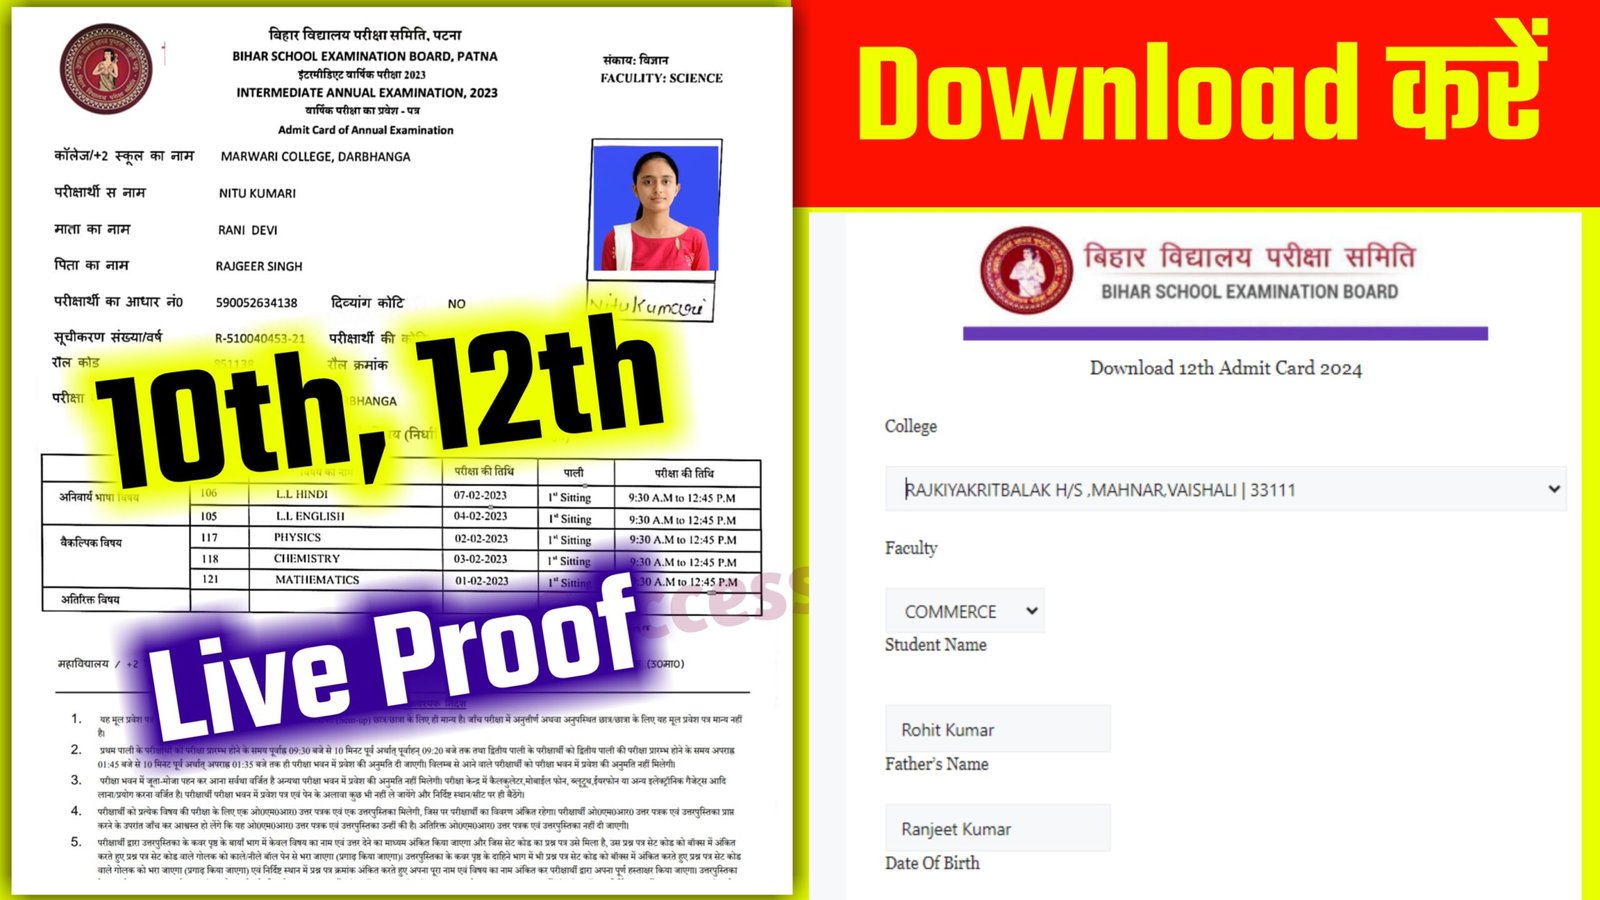 12th admit card kaise download kare 2024,12th admit card kaise download karen 2024,matric inter admit kaise download kare 2024,how to download 12th final admit card 2024,bihar board exam 2024,bihar board 12th exam admit card 2024,bihar board inter dummy admit card 2024,how to download 10th 12th admit card 2024,bihar board 12th admit card 2024 download link,12th admit card 2024 download,BSEB UPDATED,BSEB Updated,Bihar Board Matric Admit card kaise Download kare,12th